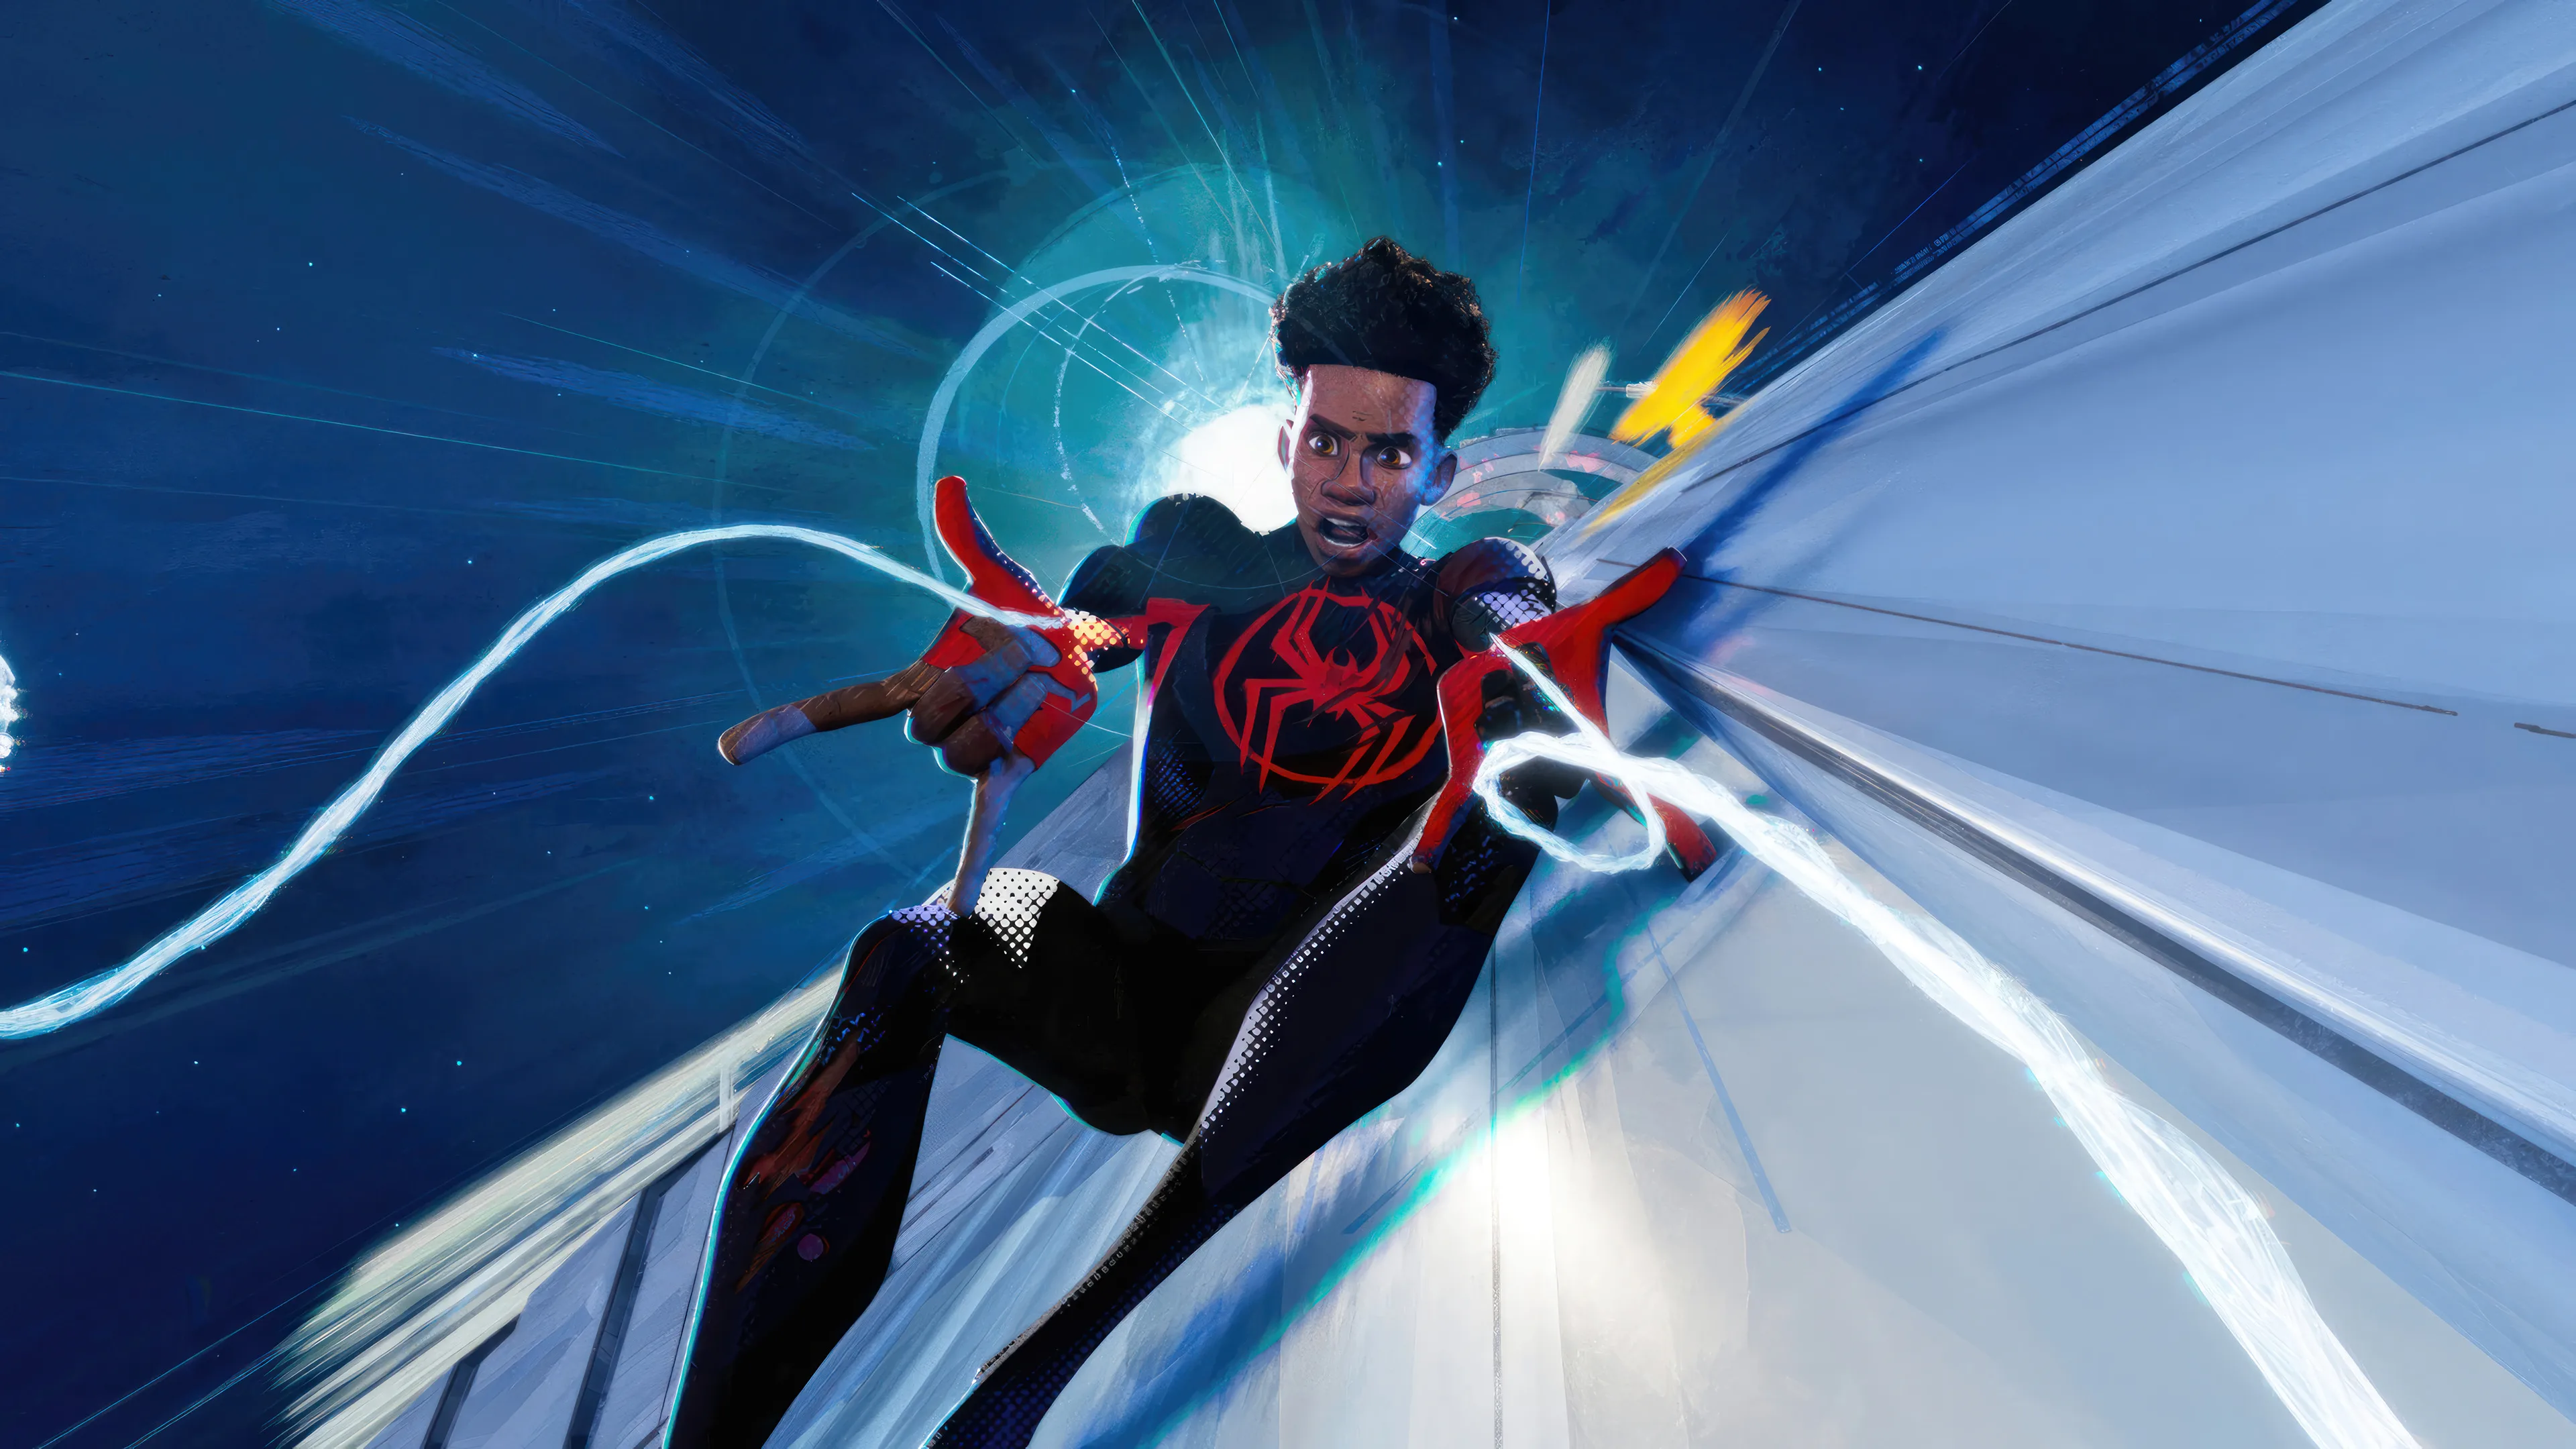 Miles Morales Wallpapers and Backgrounds